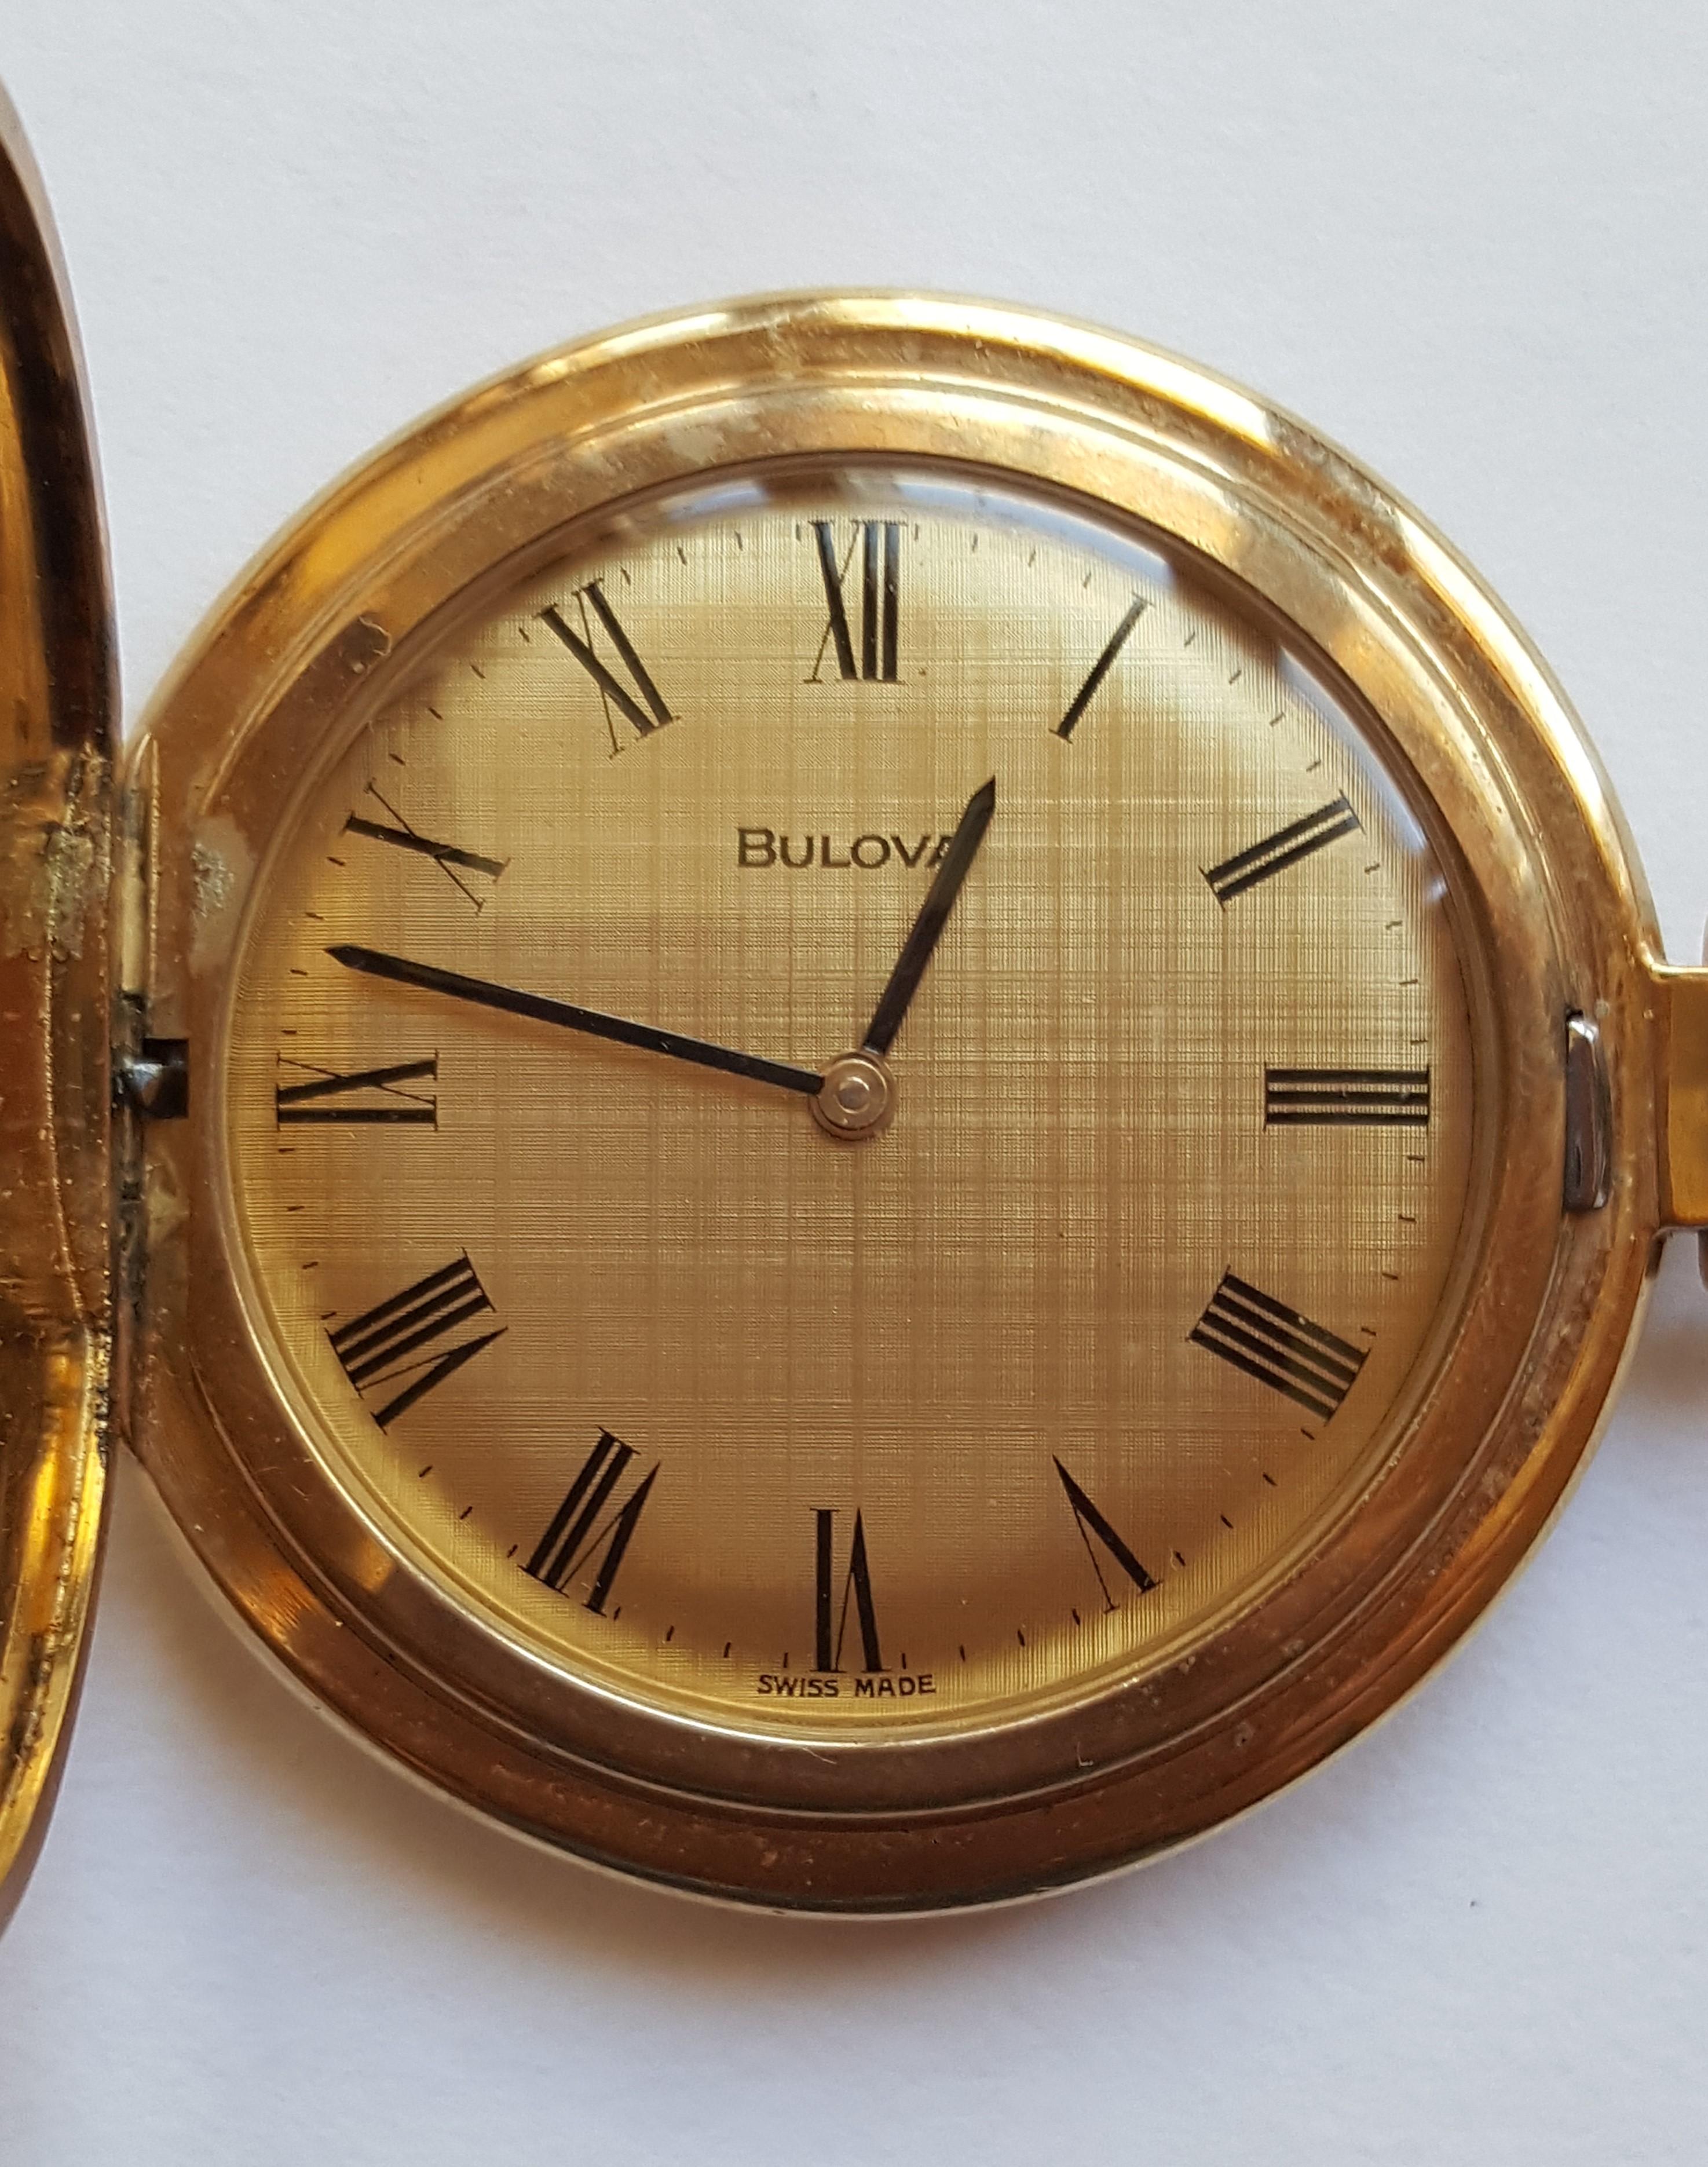 Vintage Gold Plated Bulova Pocket Watch, 1970's, 17 Jewel, Working, Unadjusted,  Excellent Condition, Bulova Watch Co., Swiss Made,  Black Roman Numerals. Gold Face, Textured Case Finish.

This is a beautiful watch and it's working.

This watch has